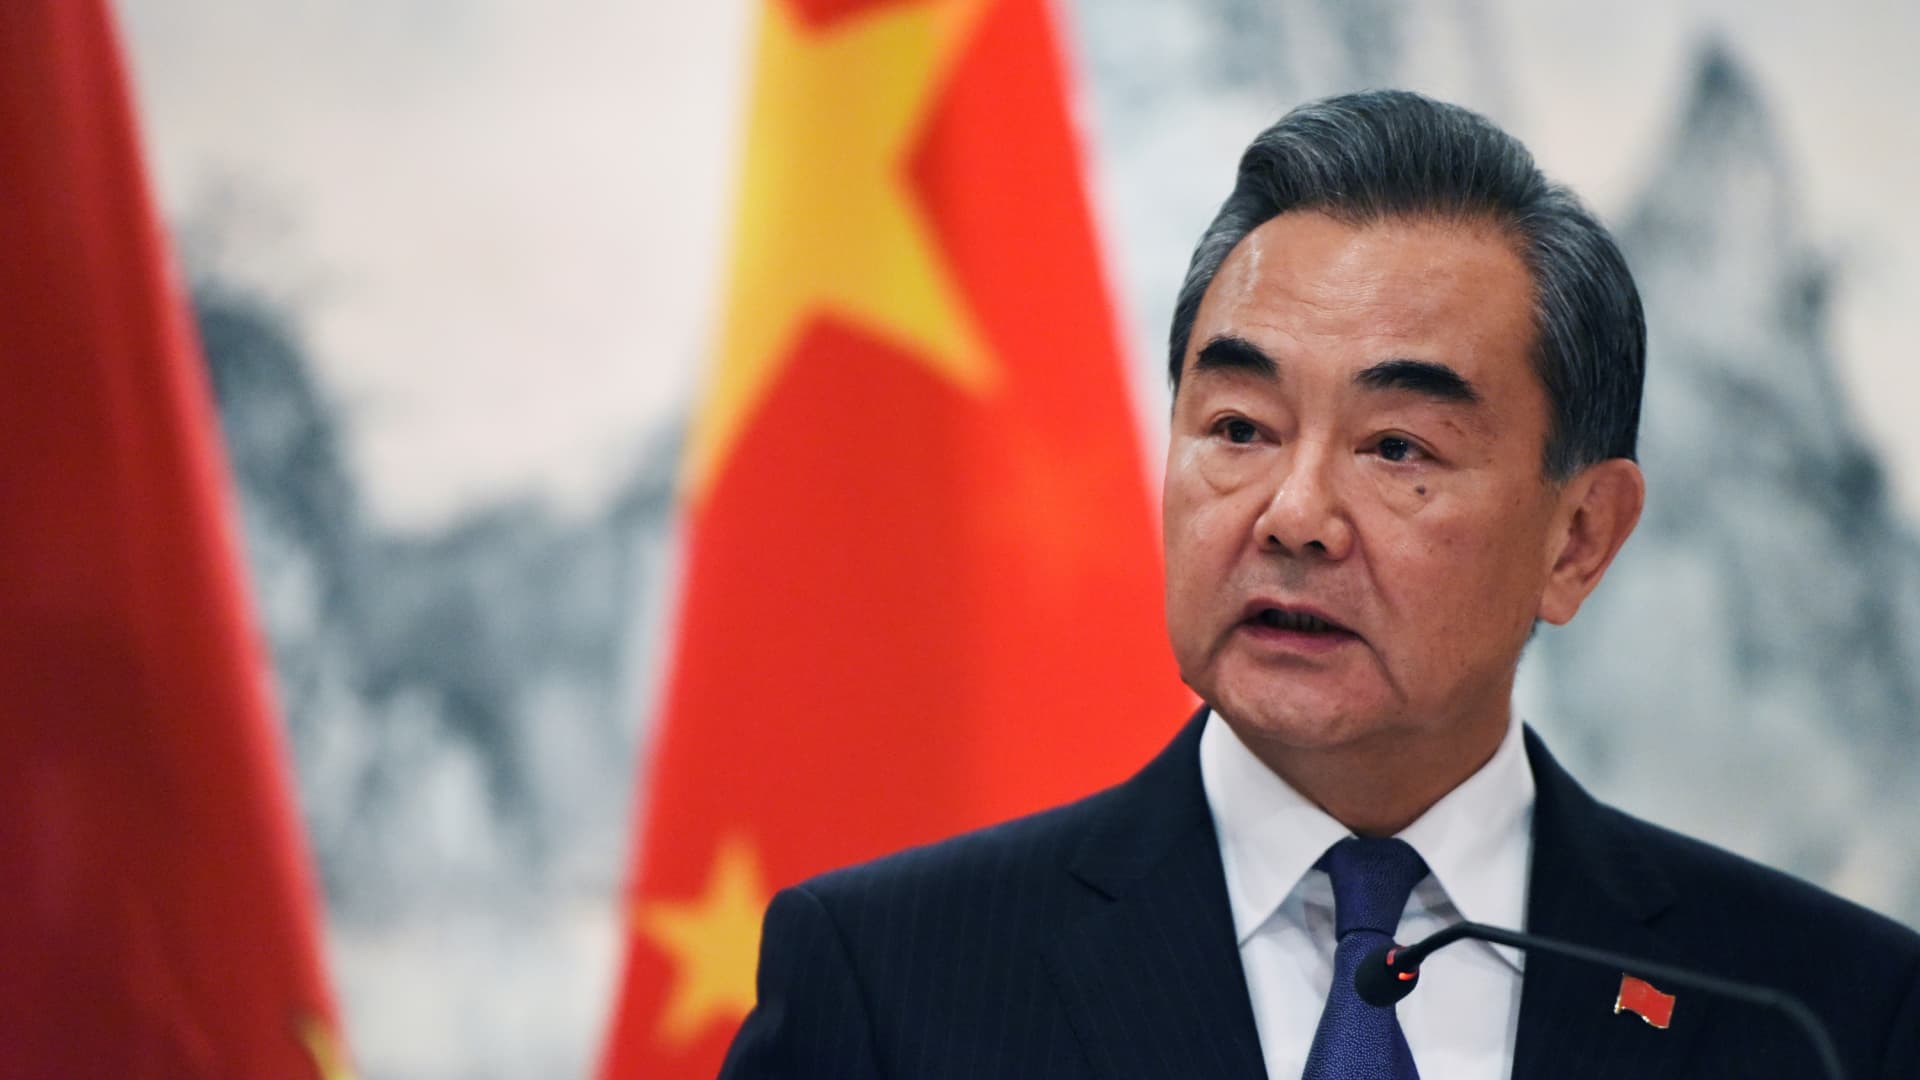 Chinese Foreign Minister Wang Yi speaks at a news conference after restoring diplomatic ties with Kiribati on the sidelines of the United Nations General Assembly in New York, U.S. September 27, 2019.